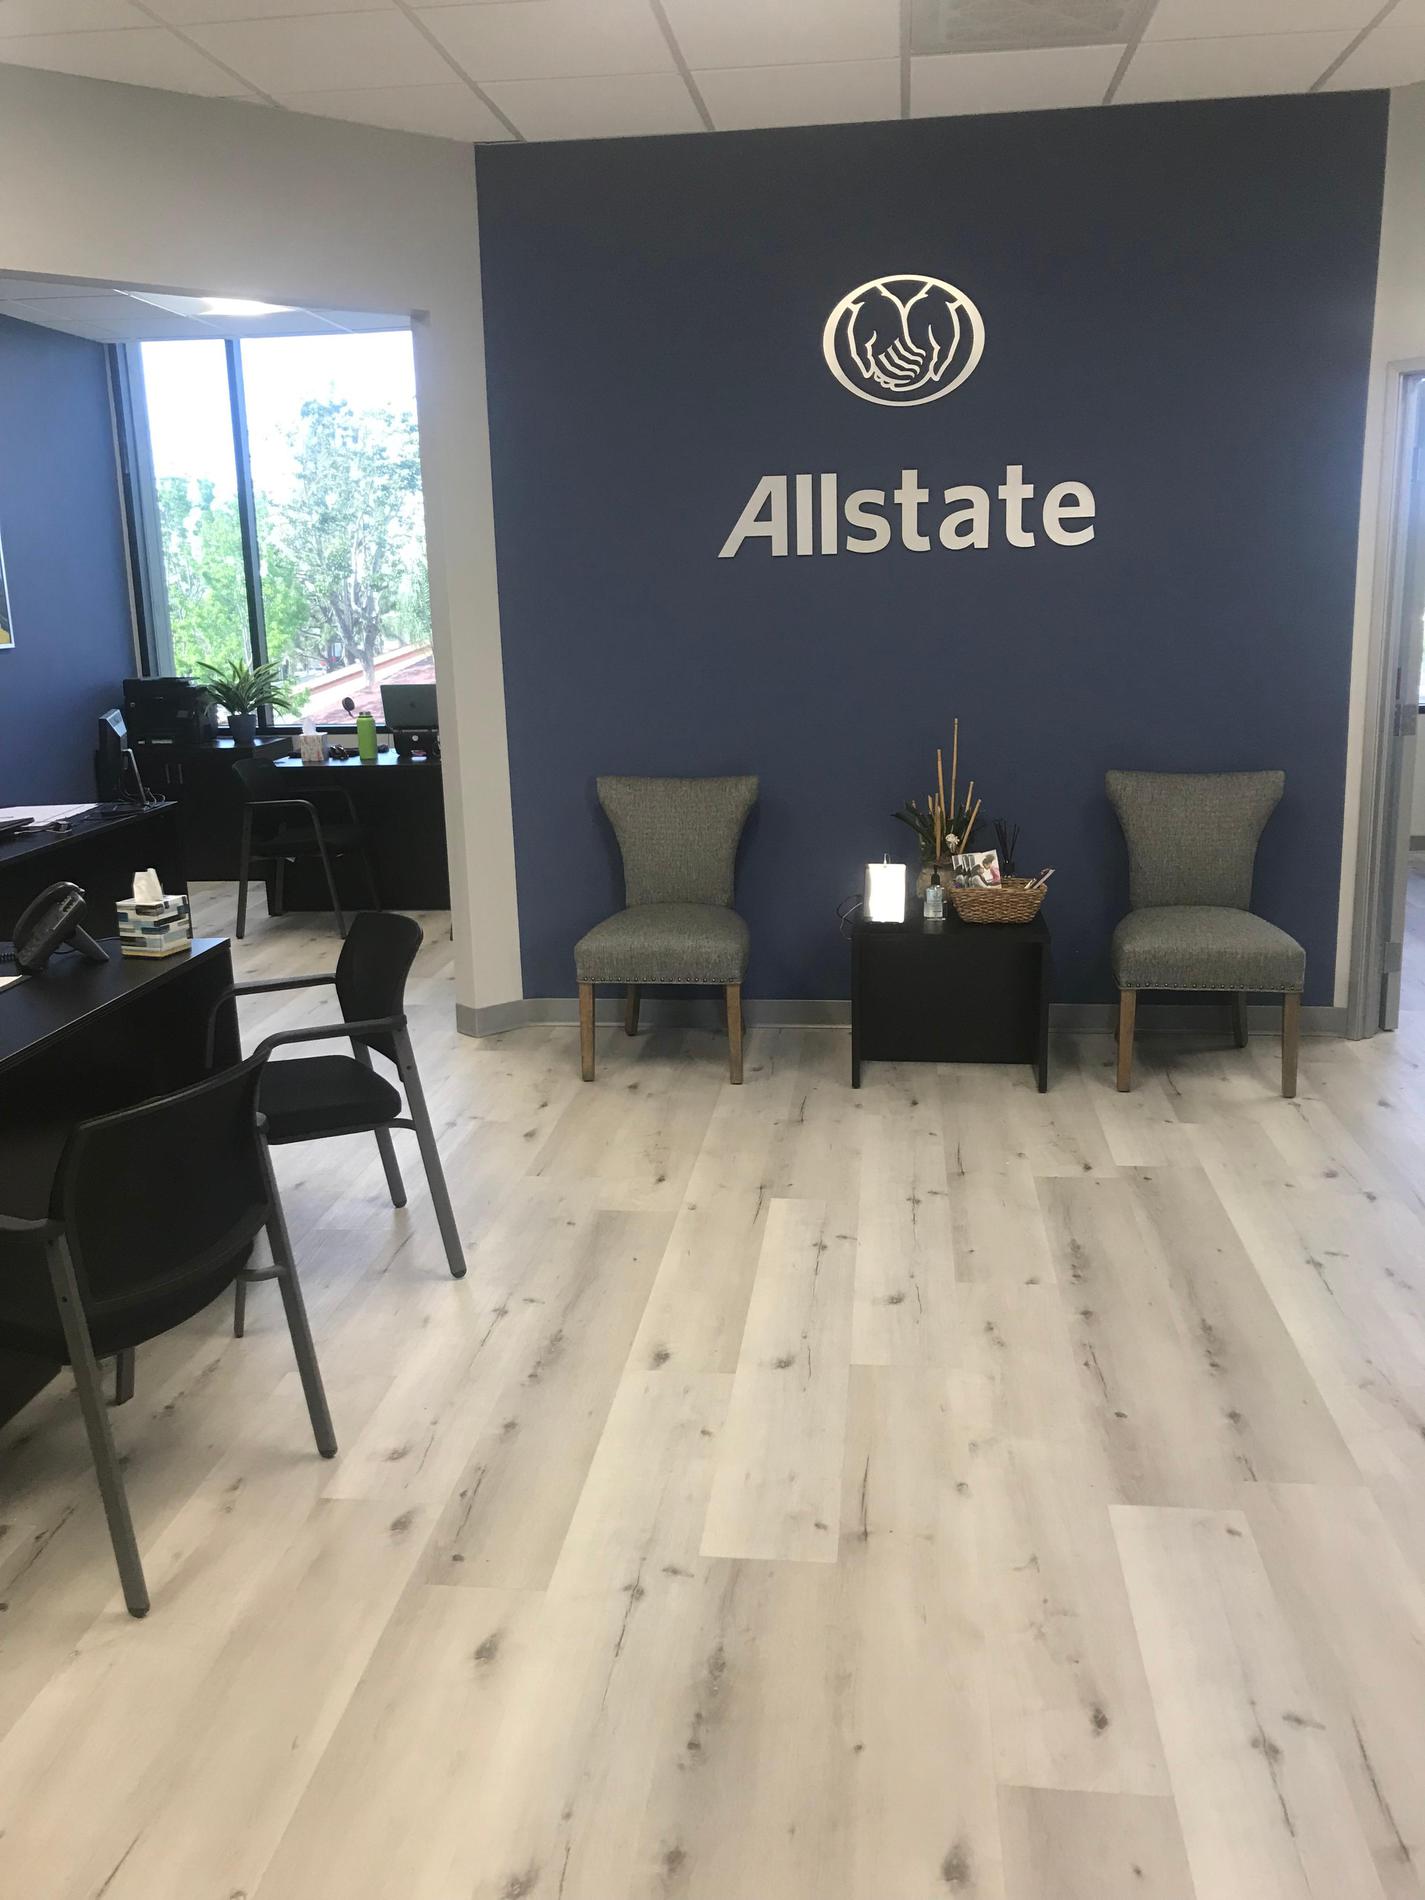 Images SoCal Insurance & Financial Services Inc: Allstate Insurance